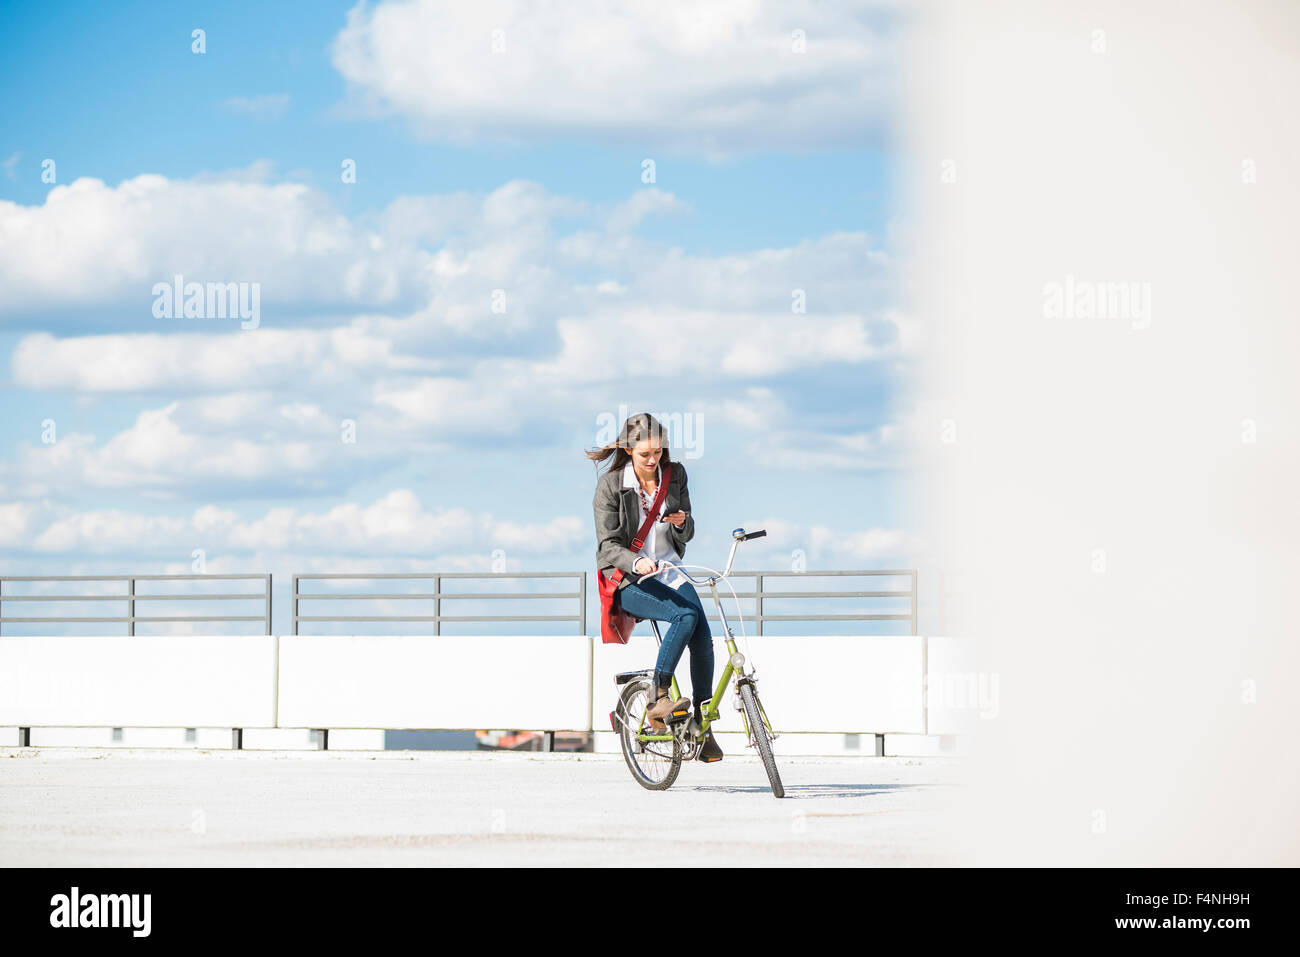 Young woman on bicycle looking at cell phone Stock Photo